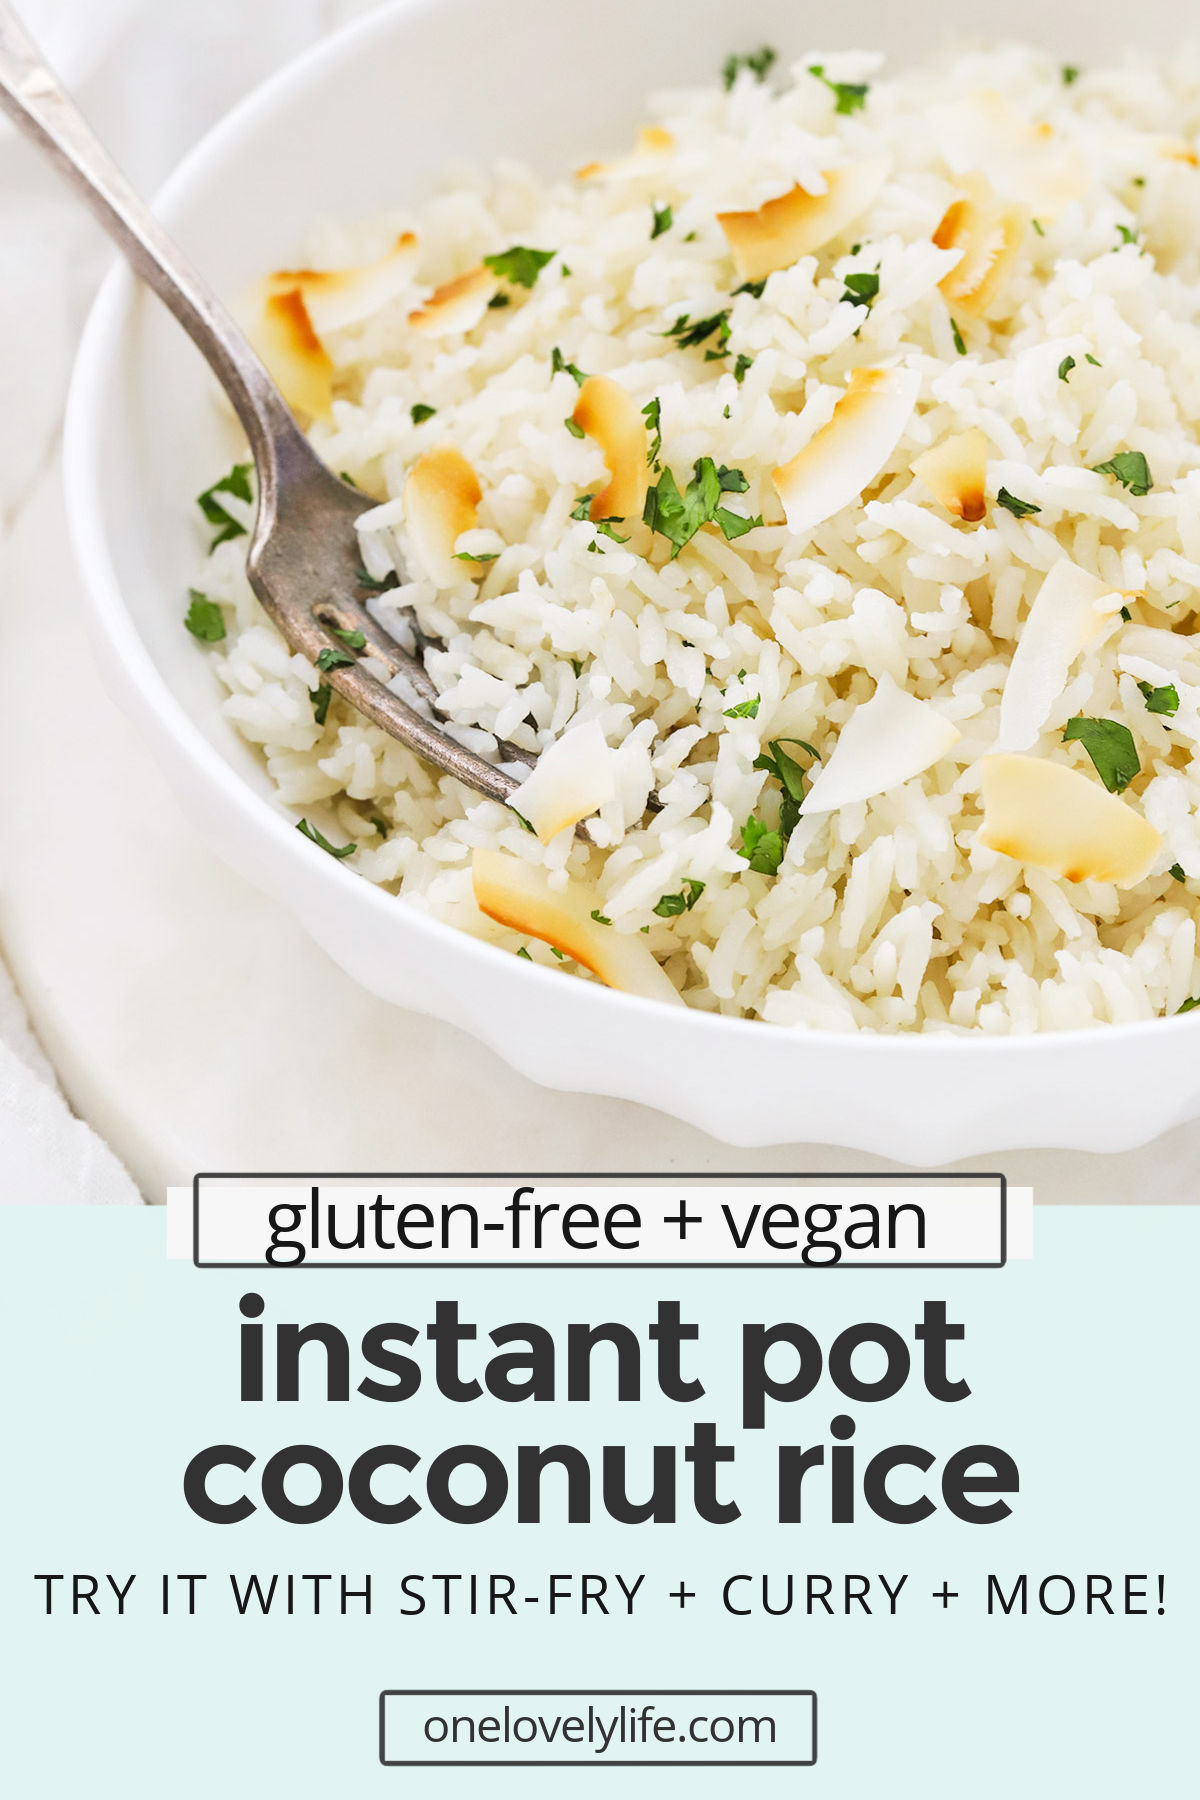 Instant Pot Coconut Rice - This pressure cooker Coconut Rice is SO easy to make and makes a delicious side dish to curries, stir-fries, and all your favorite main dishes. (Vegan, Gluten-Free) // Seasoned Rice // Thai Coconut Rice // Side Dish Recipe // Easy Coconut Rice Recipe #rice #glutenfree #instantpot #pressurecooker #curry